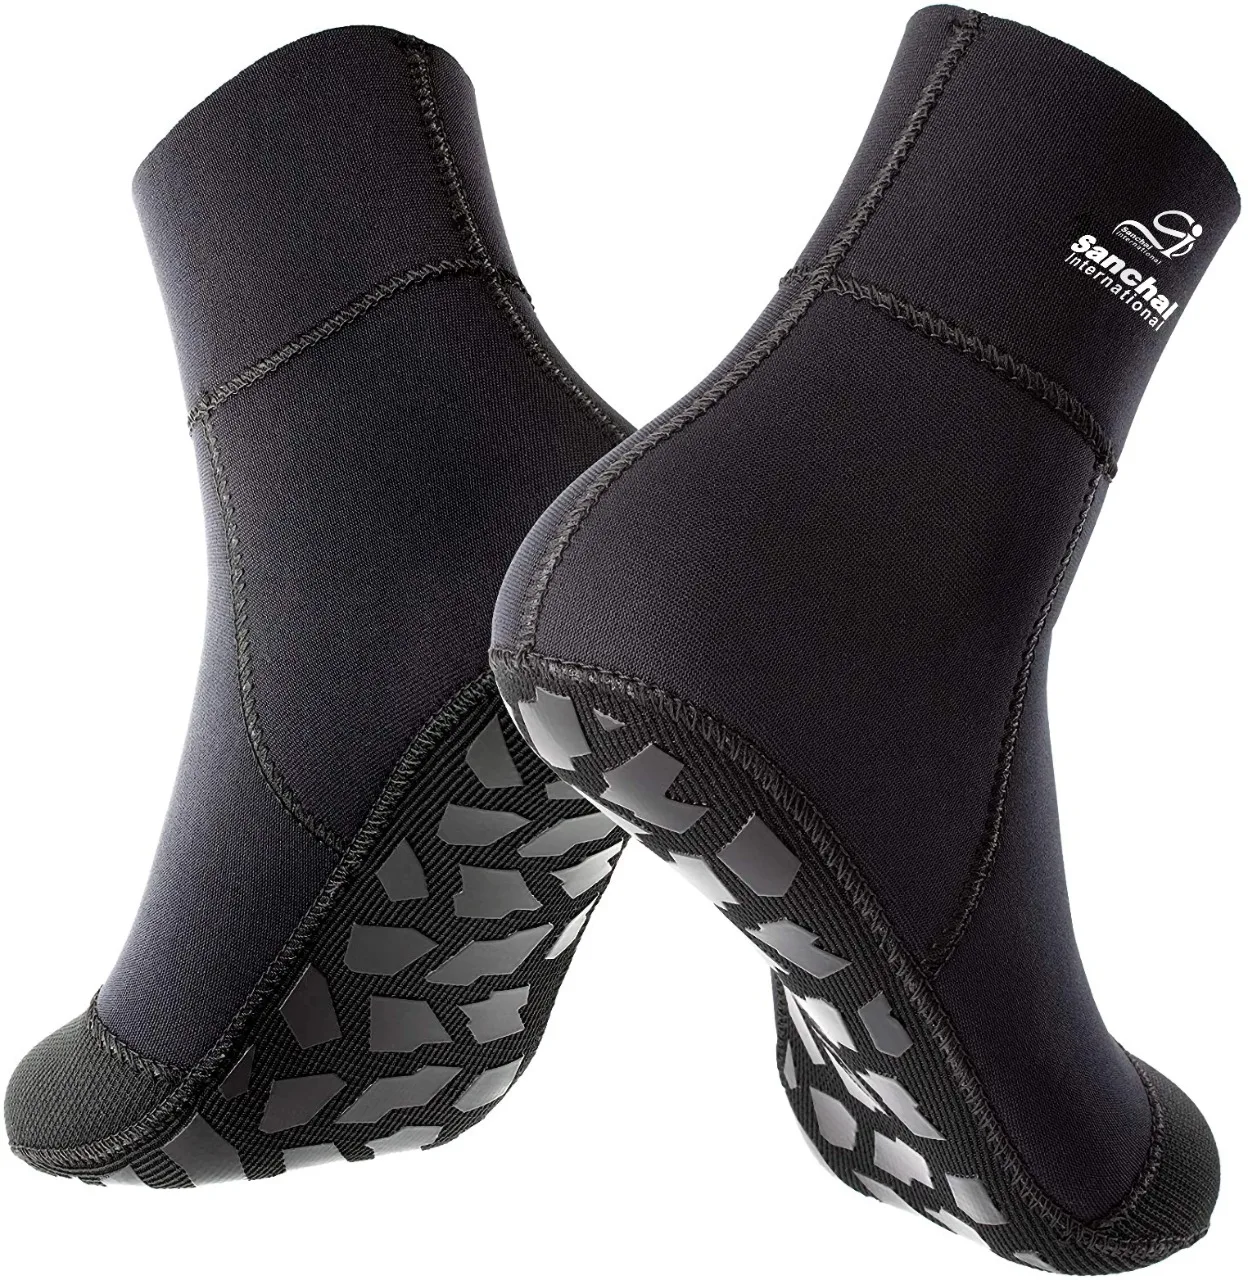 Sand Socks Made Of Lycra With Dot Sole Of Neoprene,Beach Games 